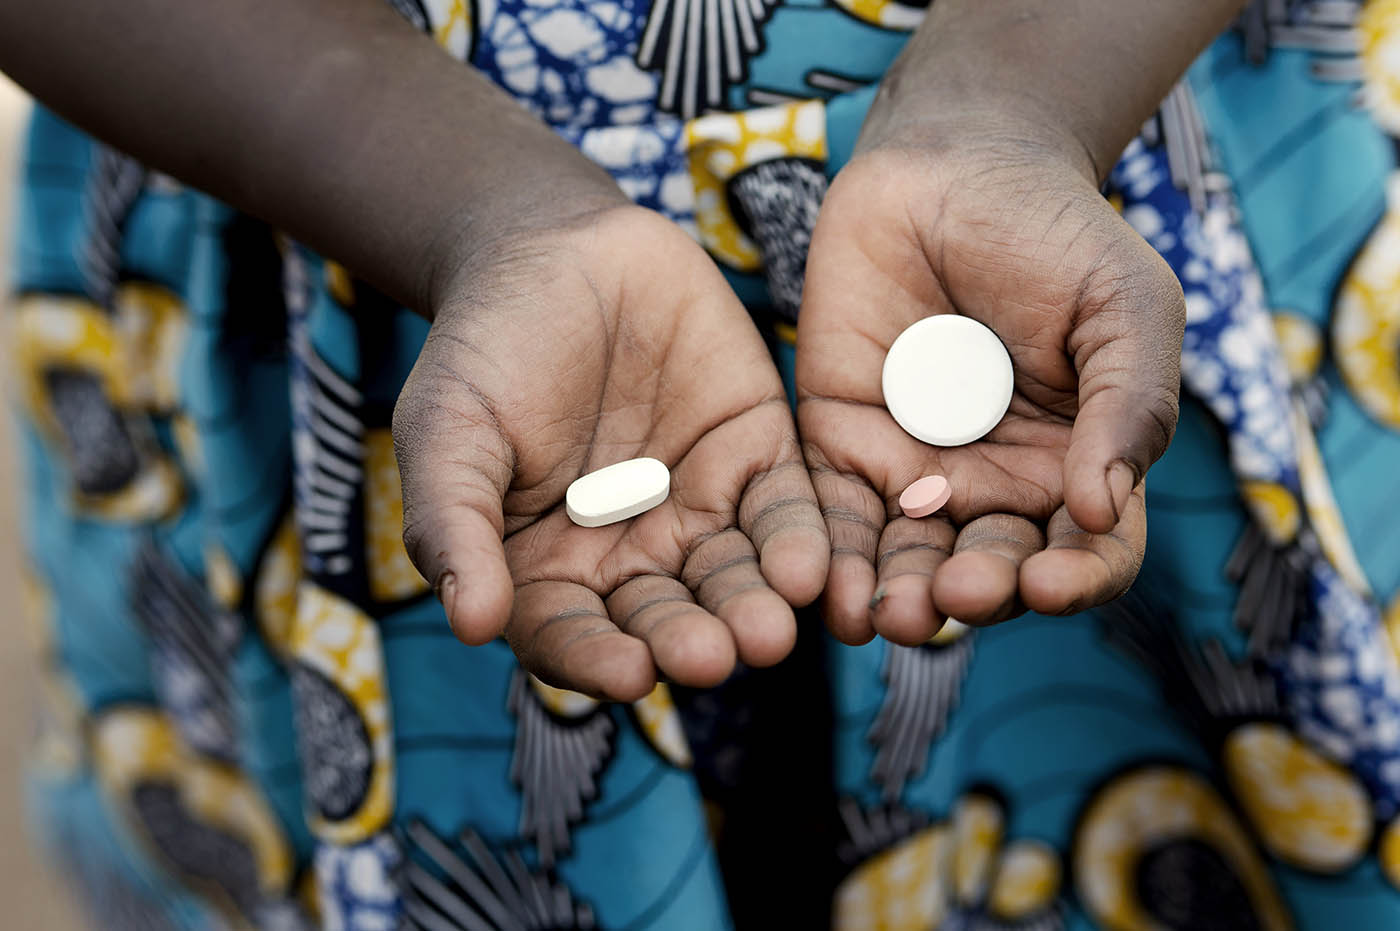 A pair of hands holding 3 tablets of medicine.